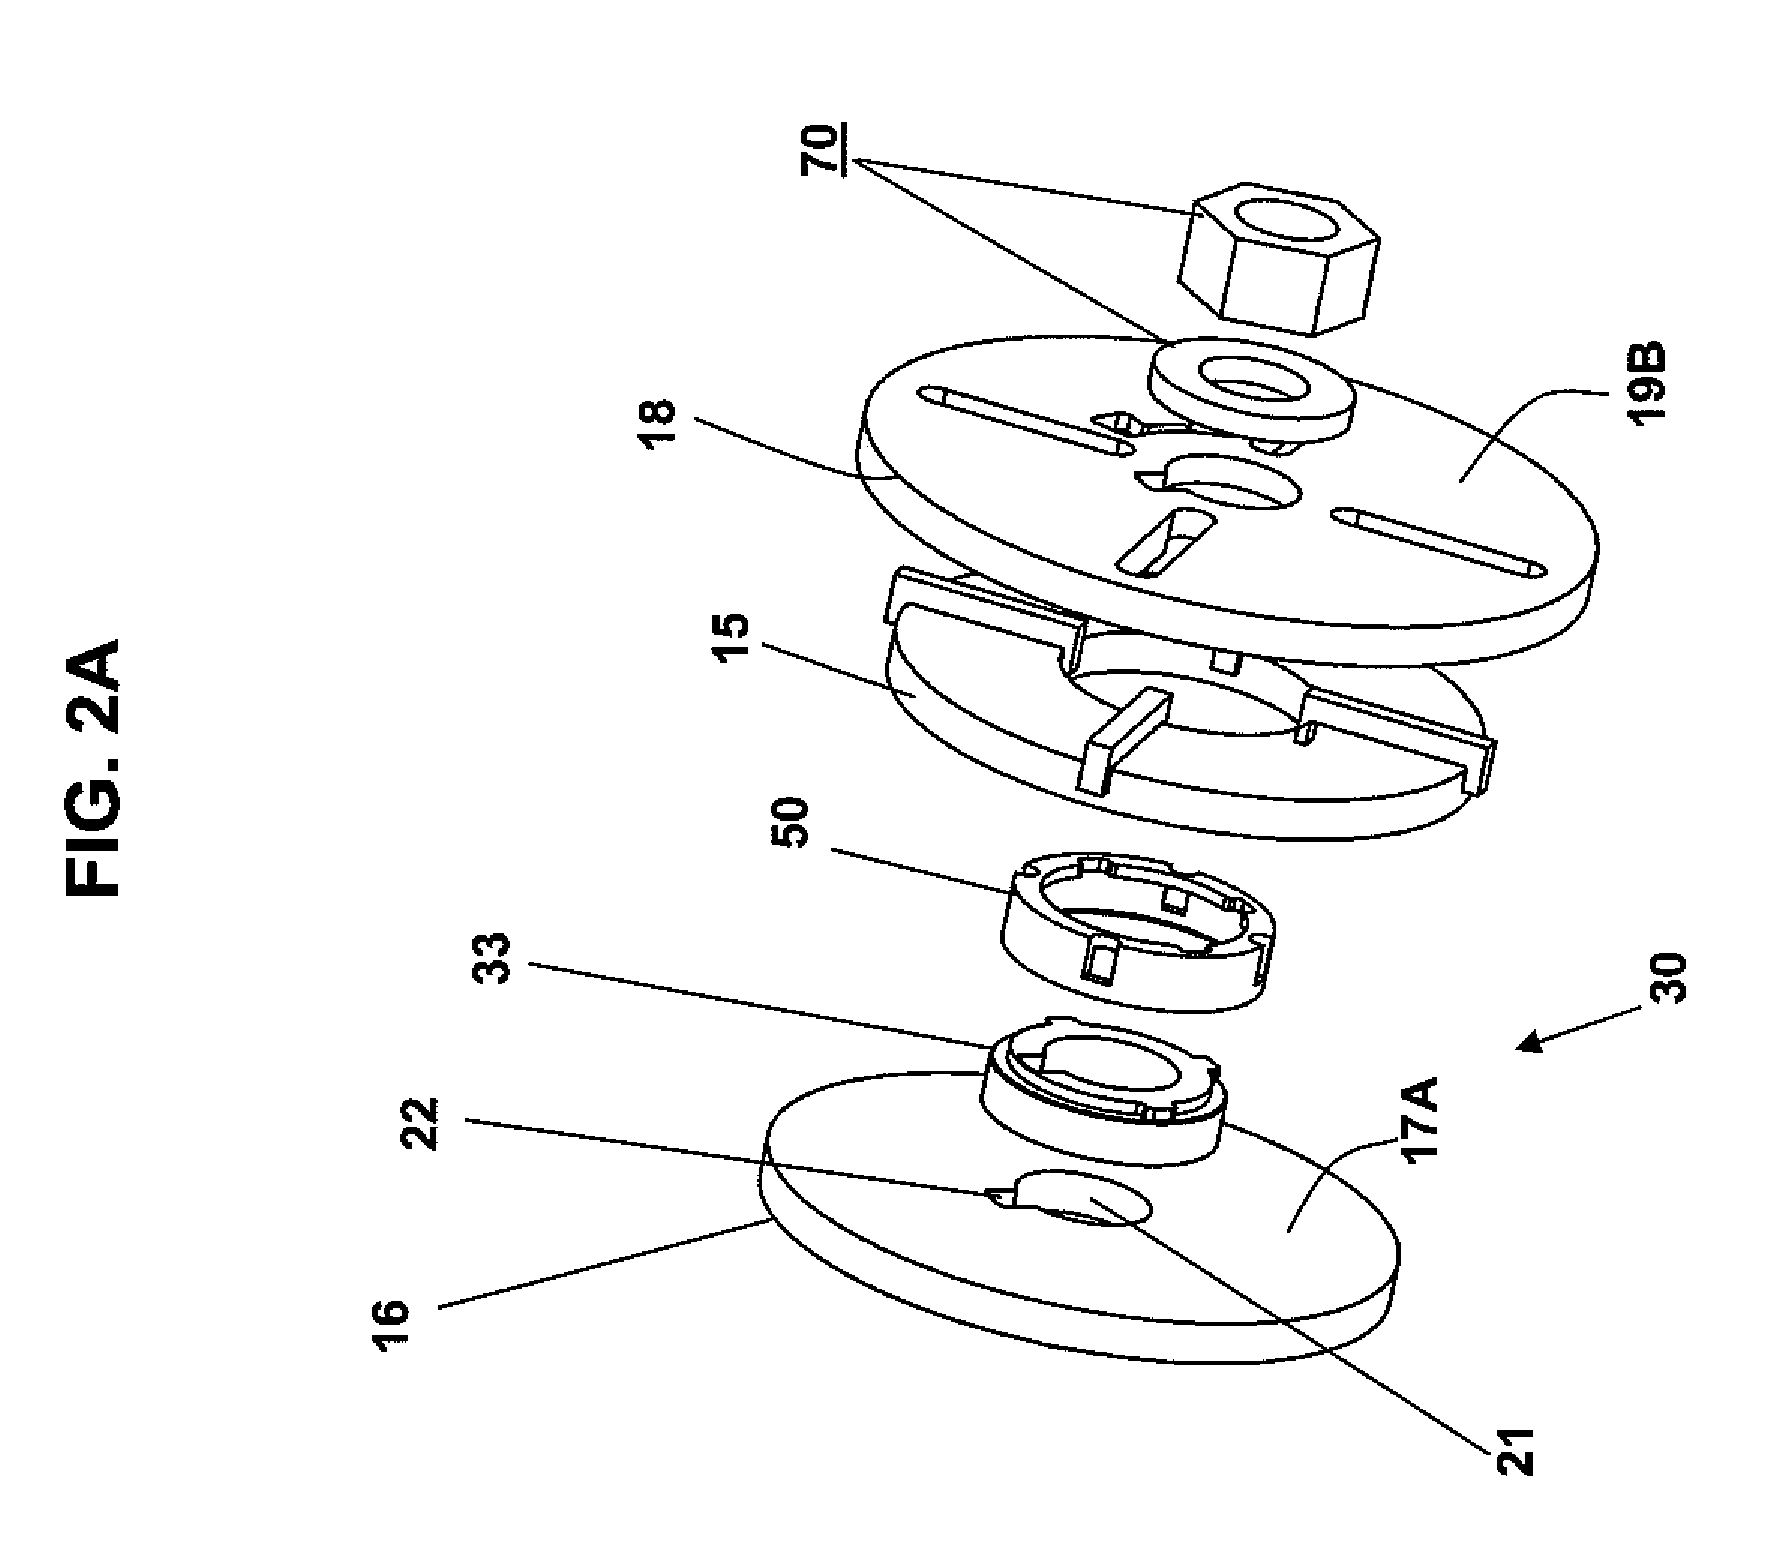 Transcranial magnetic stimulation induction coil device and method of manufacture